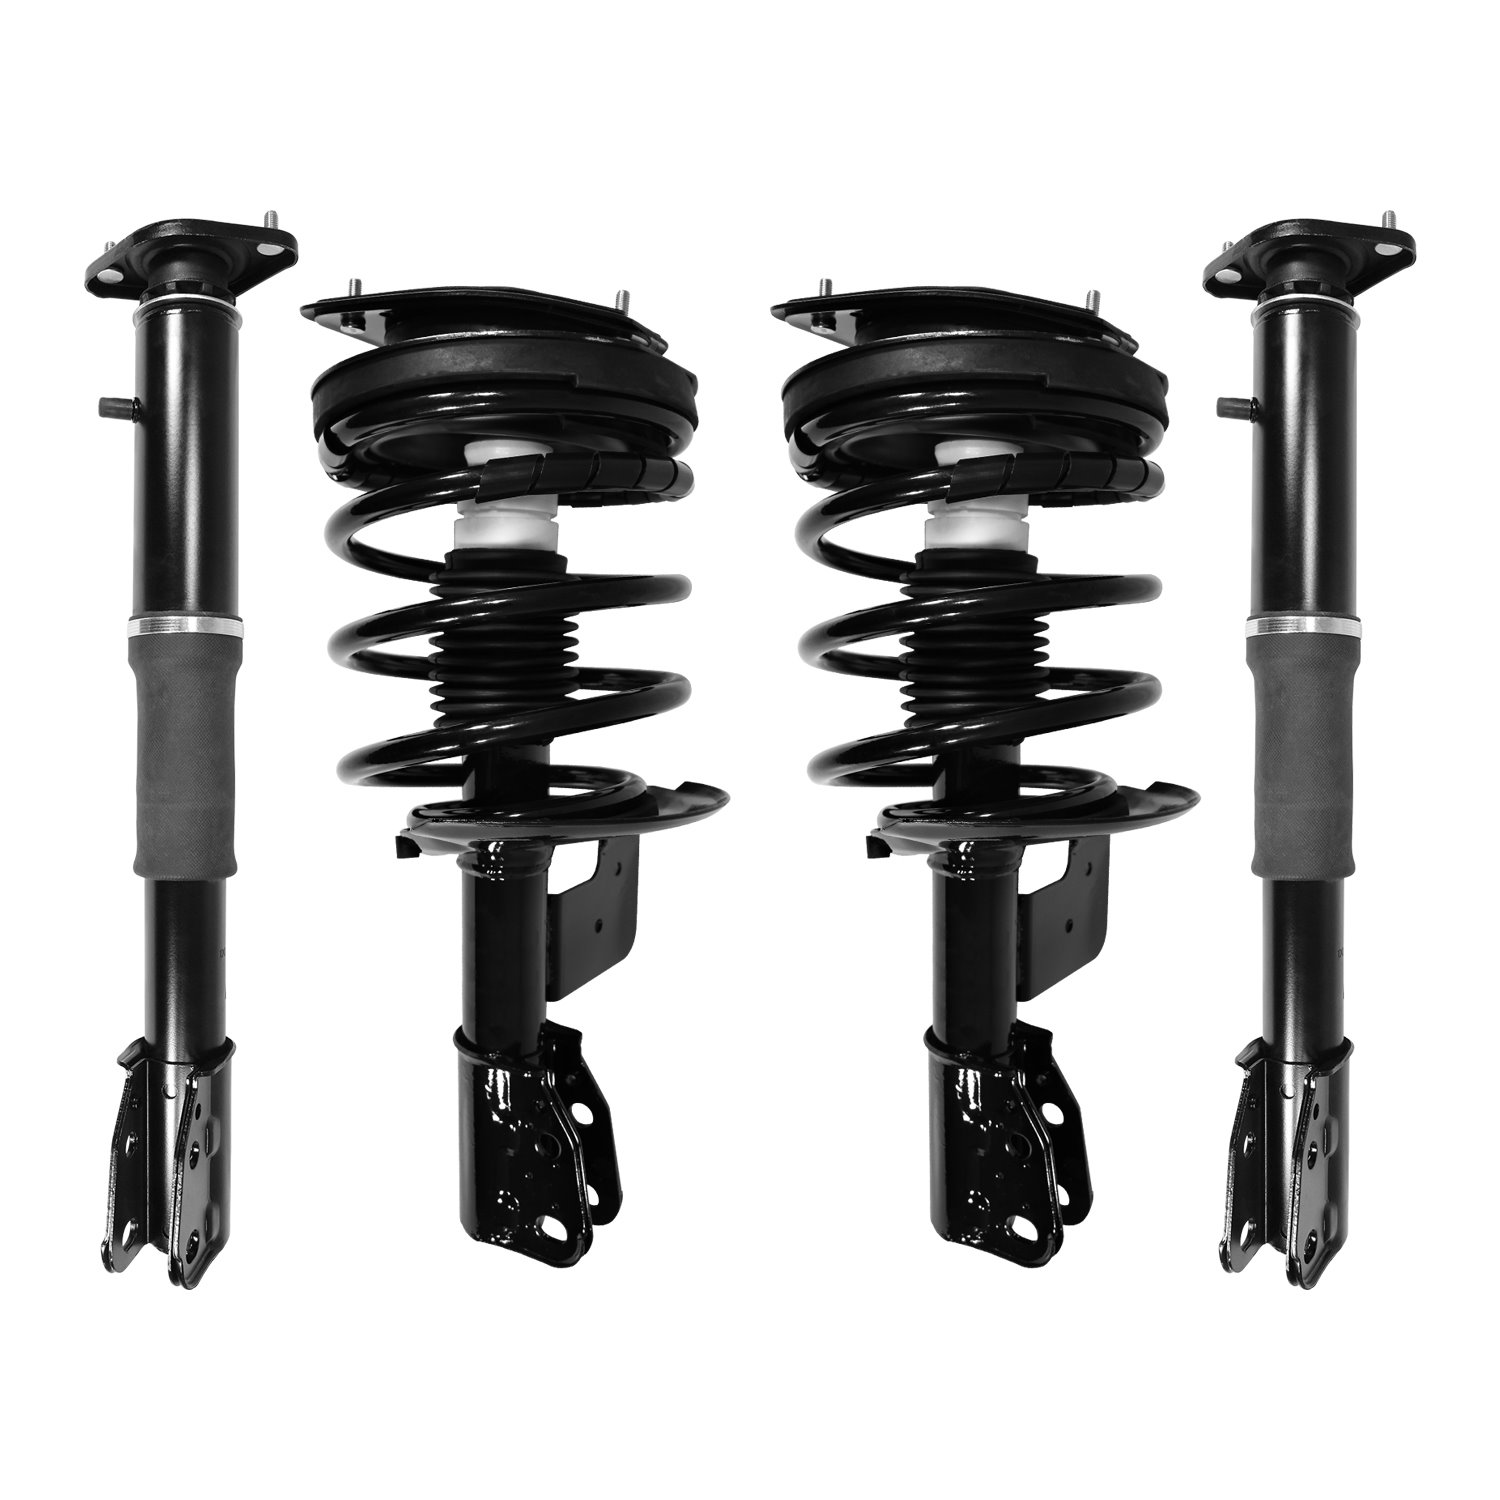 4-11420-15300-001 Front & Rear Suspension Strut & Coil Spring Assembly Kit Fits Select GM